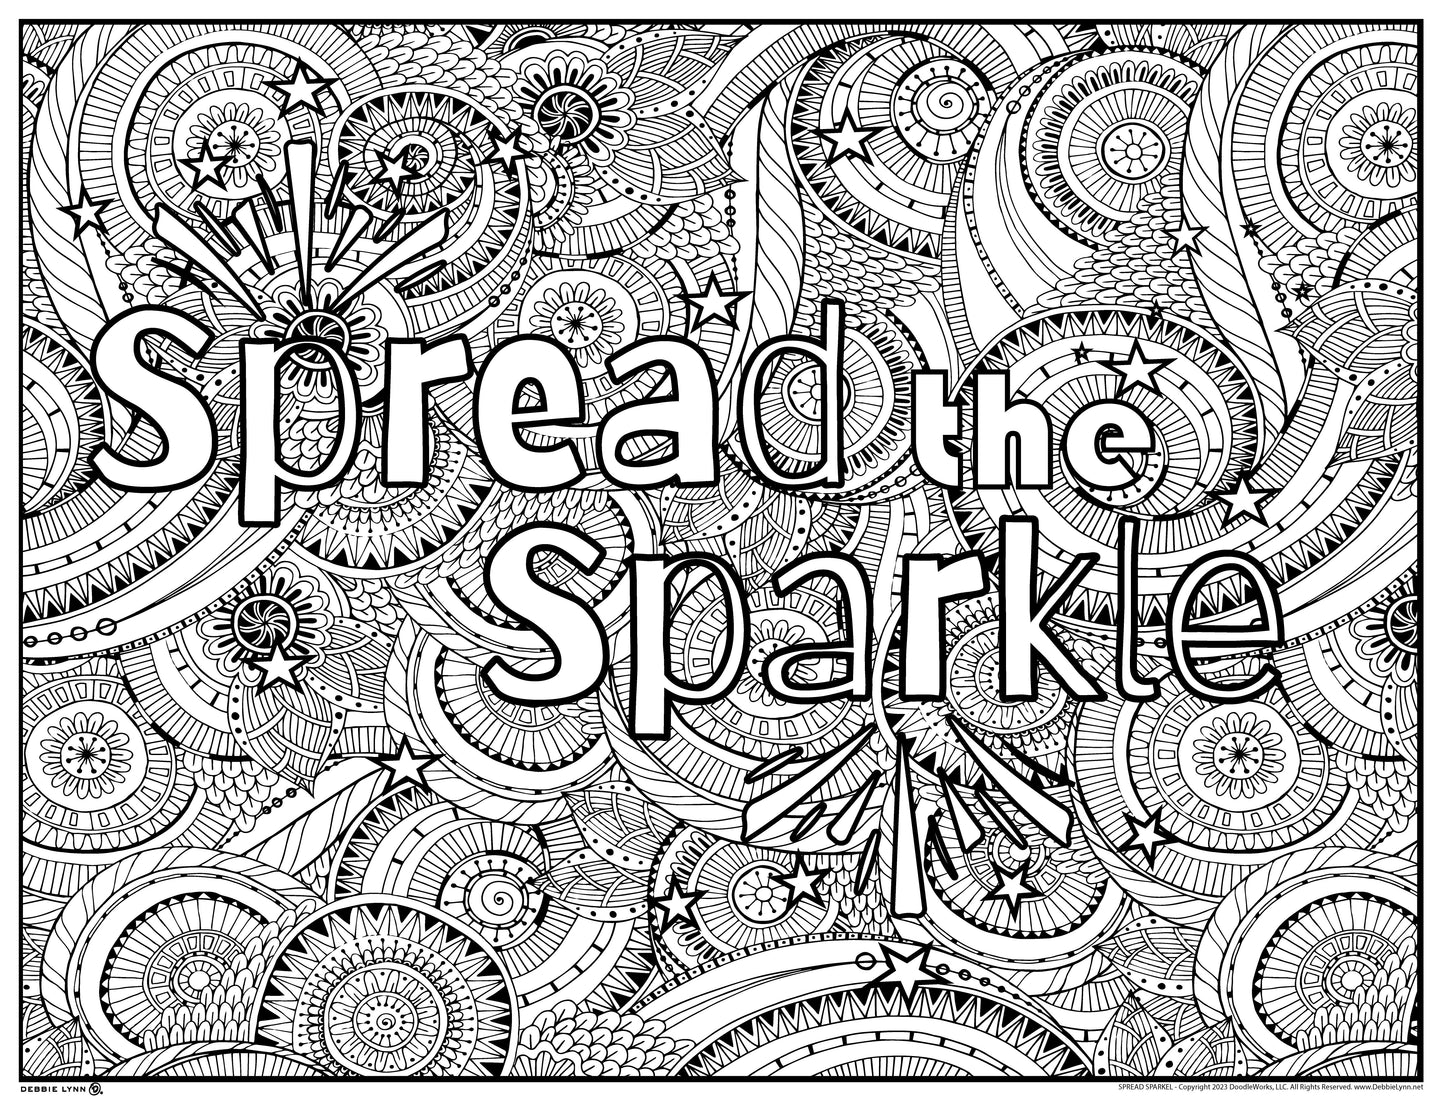 Spread The Sparkle Personalized Giant Coloring Poster 46"x60"